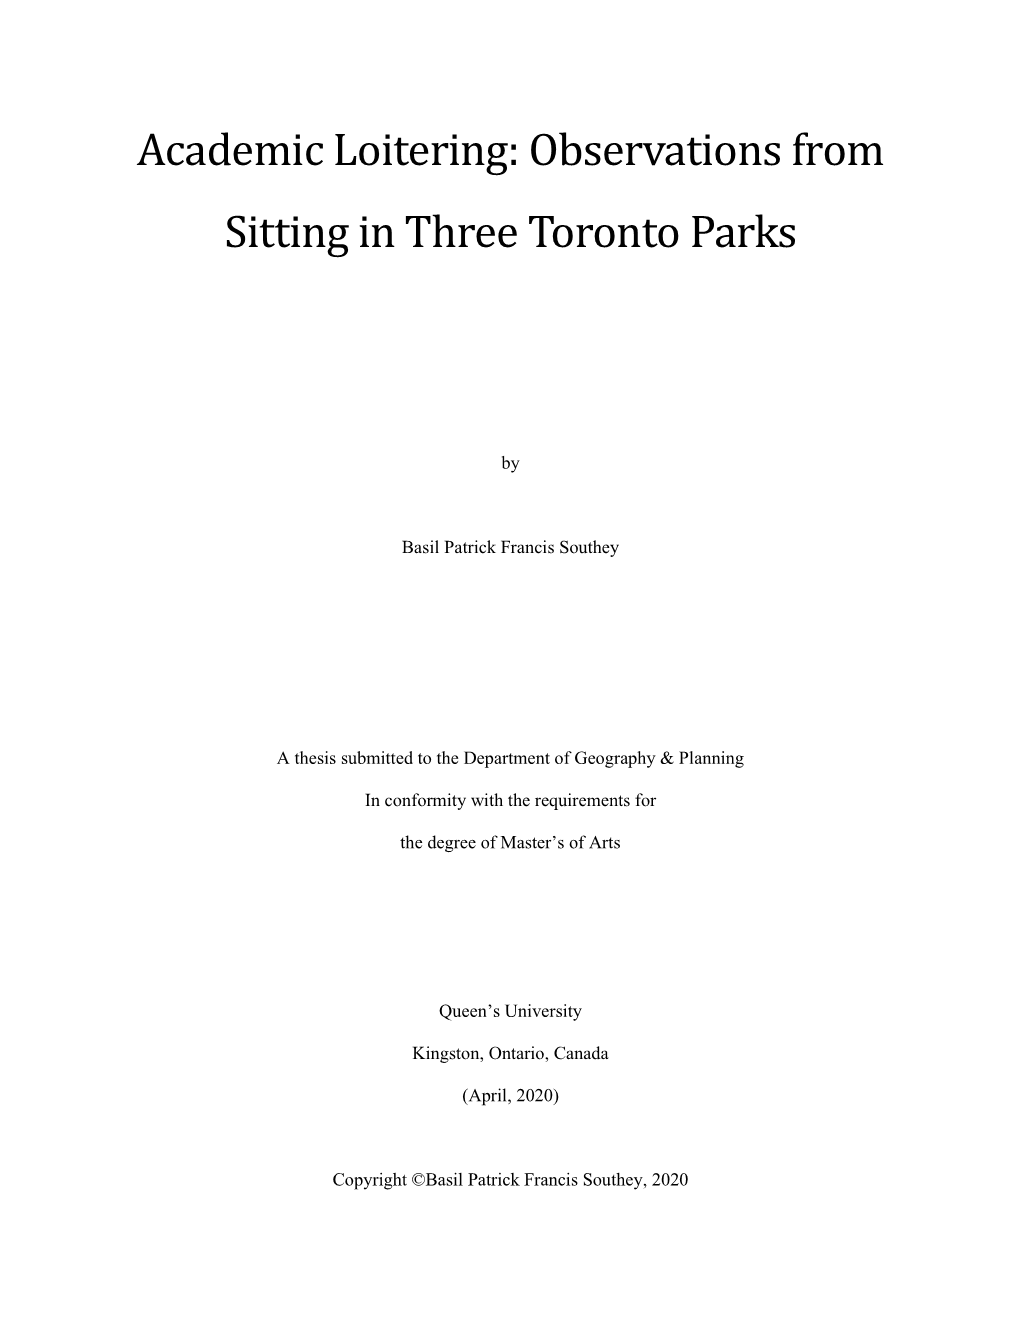 Academic Loitering: Observations from Sitting in Three Toronto Parks